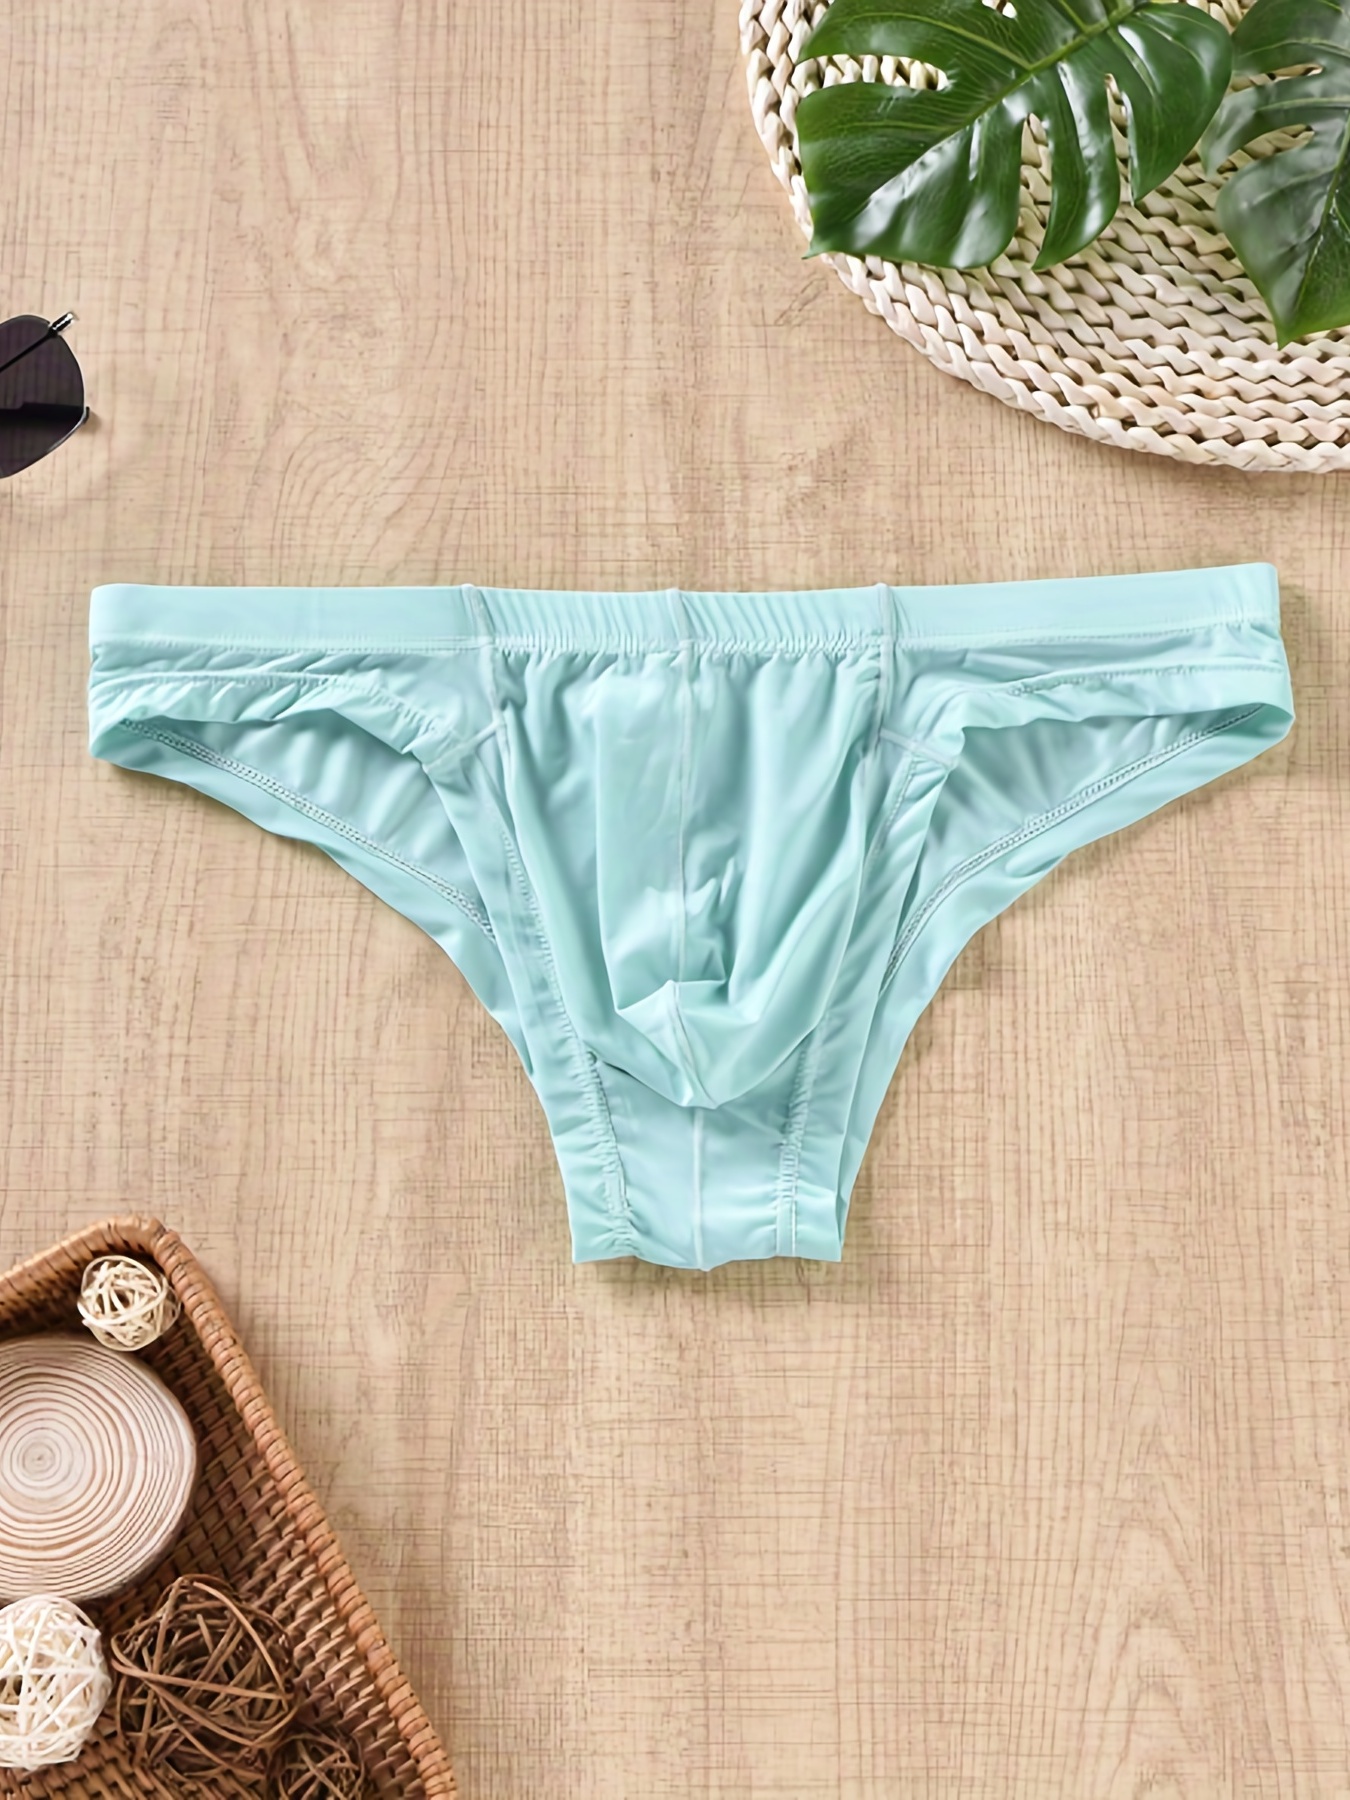 Cheap 1PC Breathable Underwear Panties Boxers Translucent Ice Silk